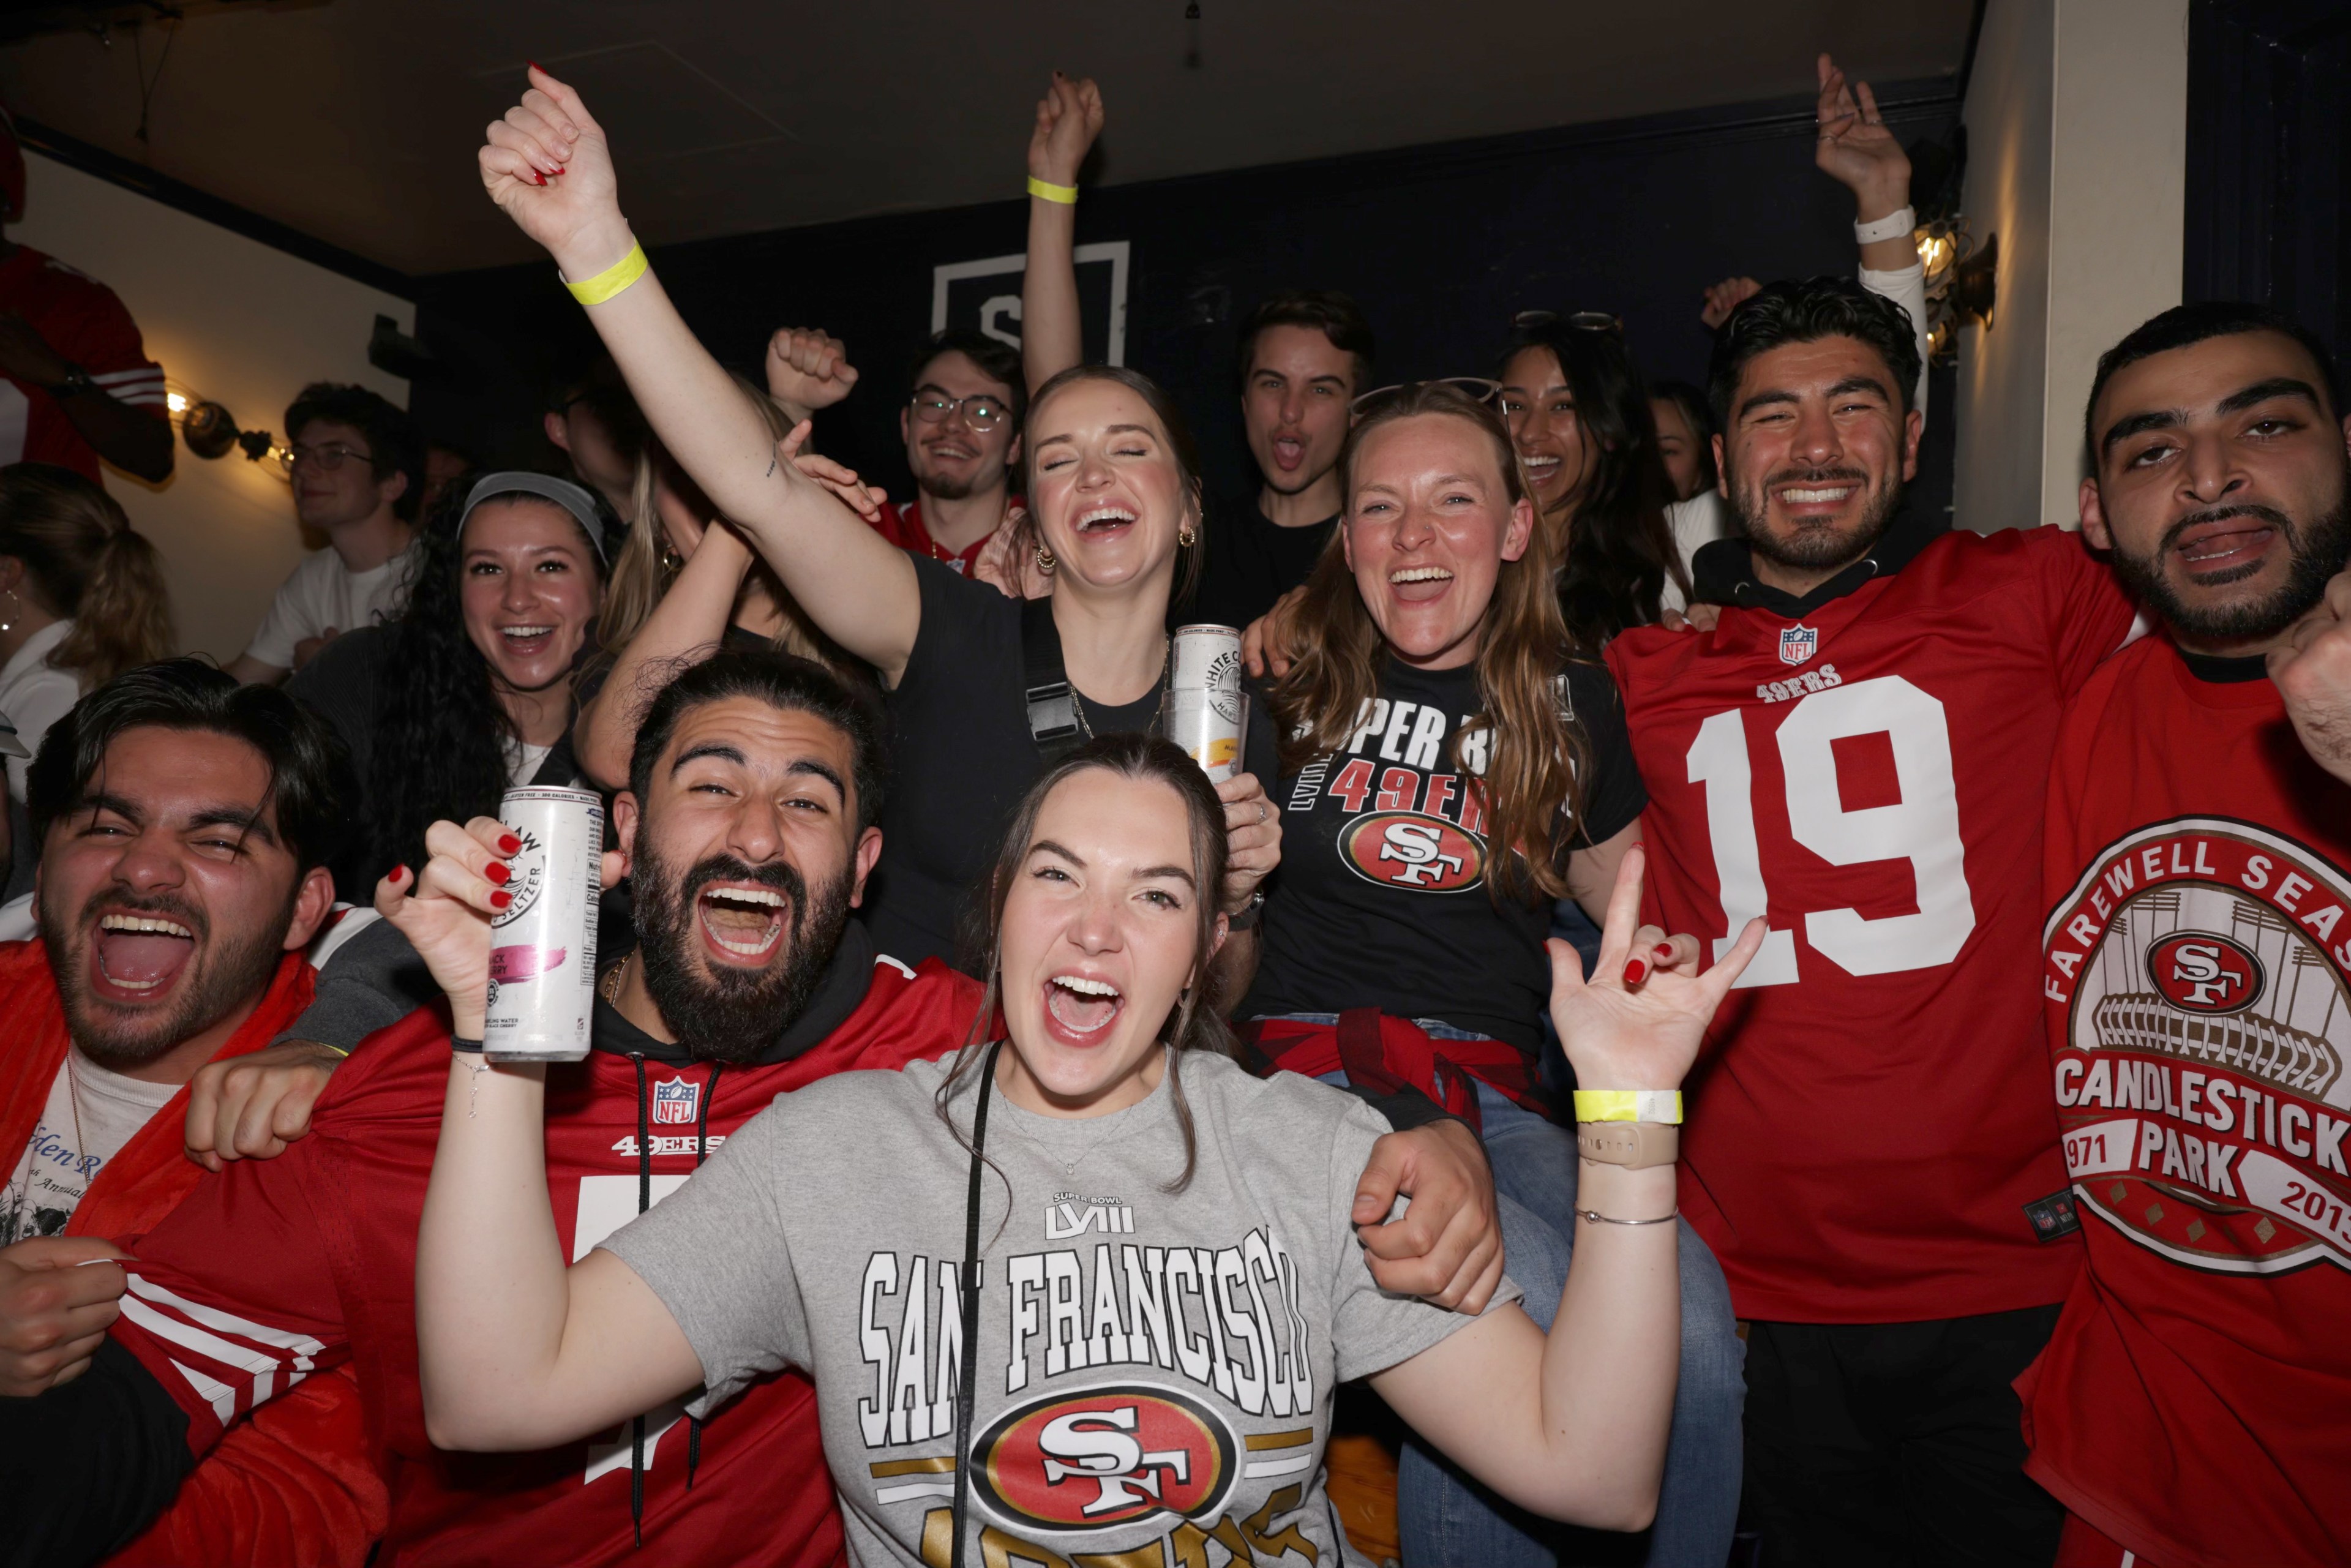 A group of jovial people in San Francisco 49ers gear, cheering with raised arms and holding drinks.